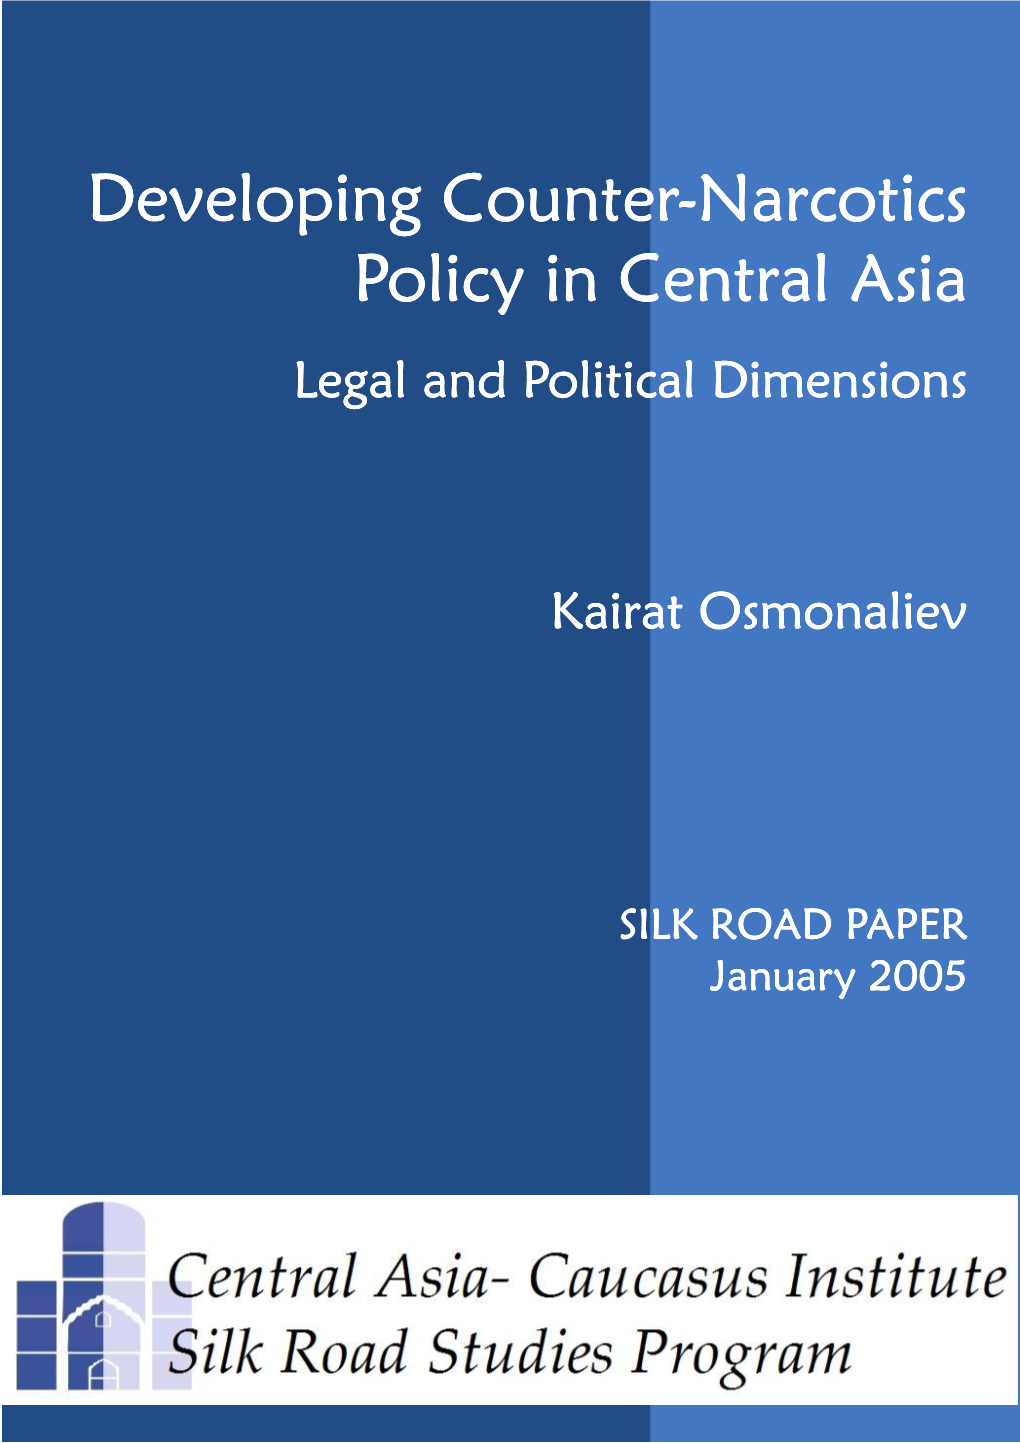 Developing Counter-Narcotics Policy in Central Asia: Legal and Political